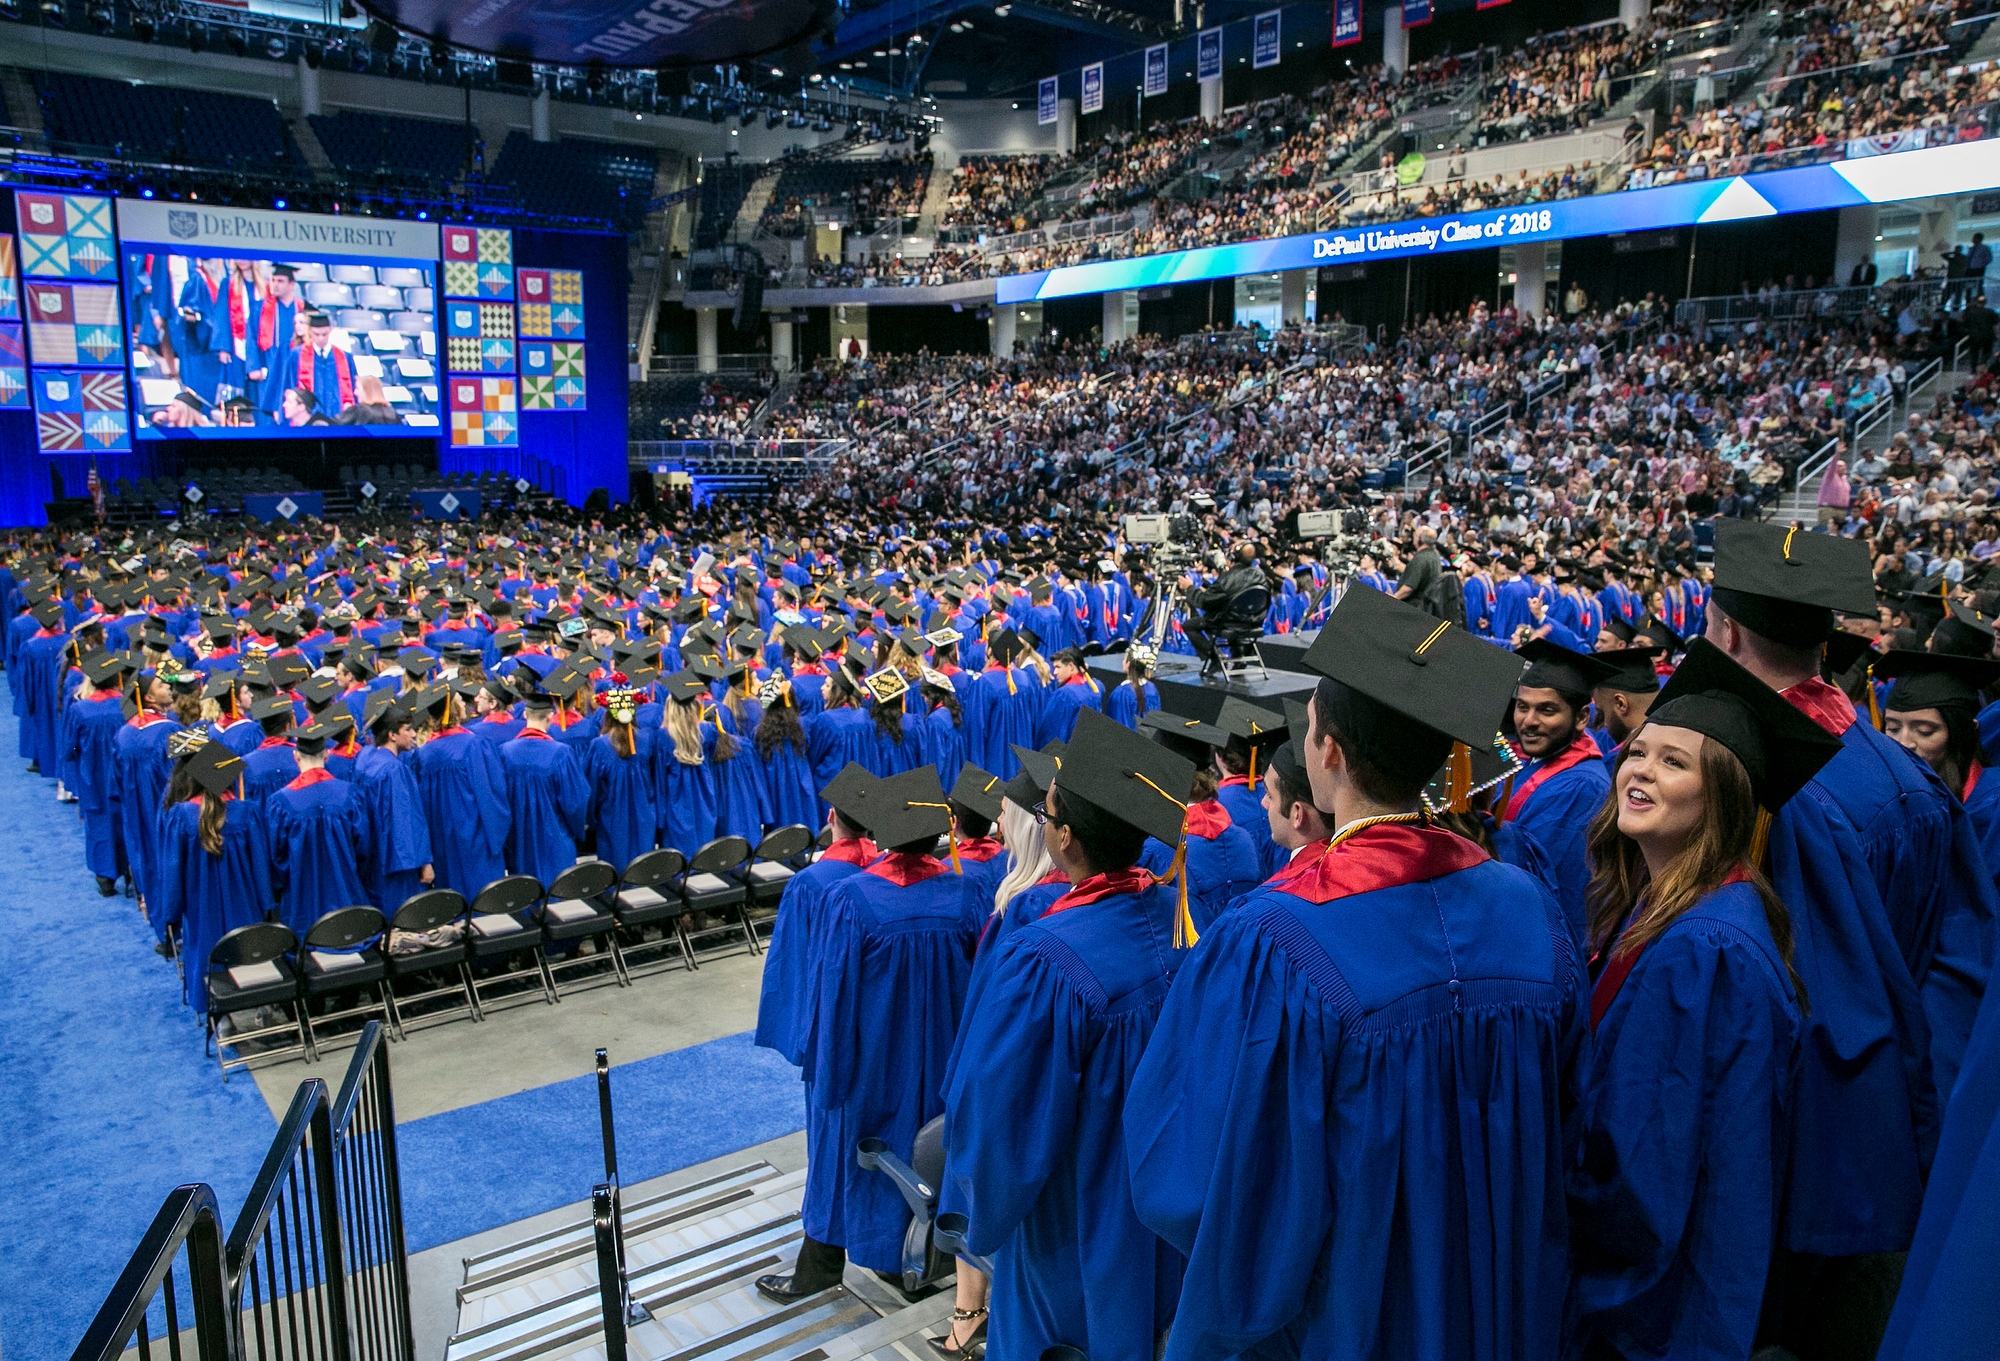 Driehaus College of Business graduates fill the final seats inside Wintrust Arena during their commencement ceremony. (DePaul University/Jamie Moncrief)